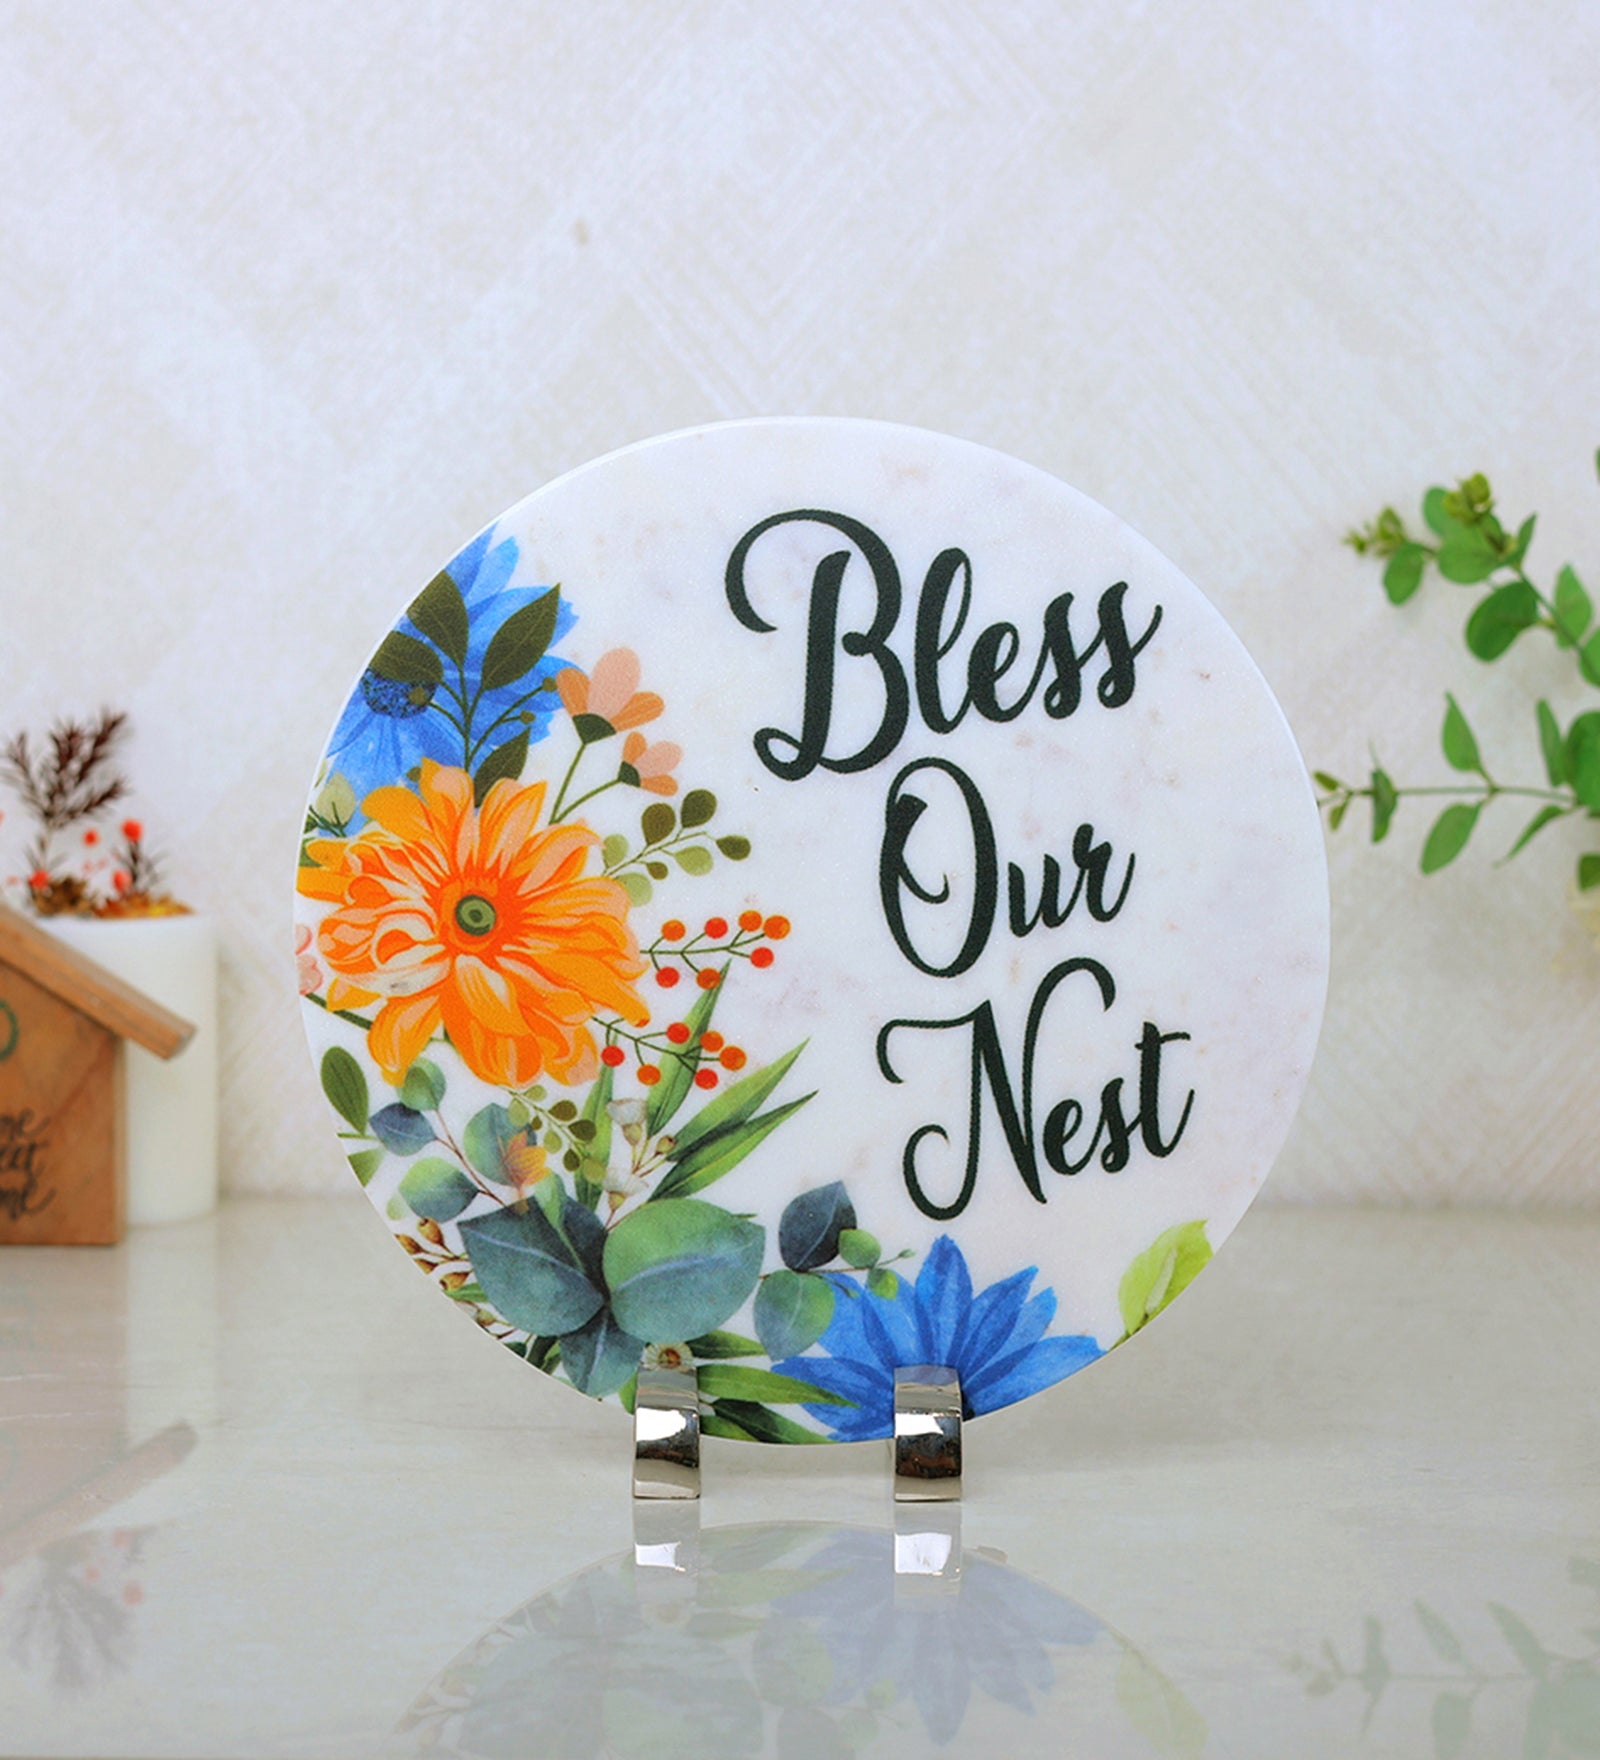 Bless Our Nest Marble Table Decor Item